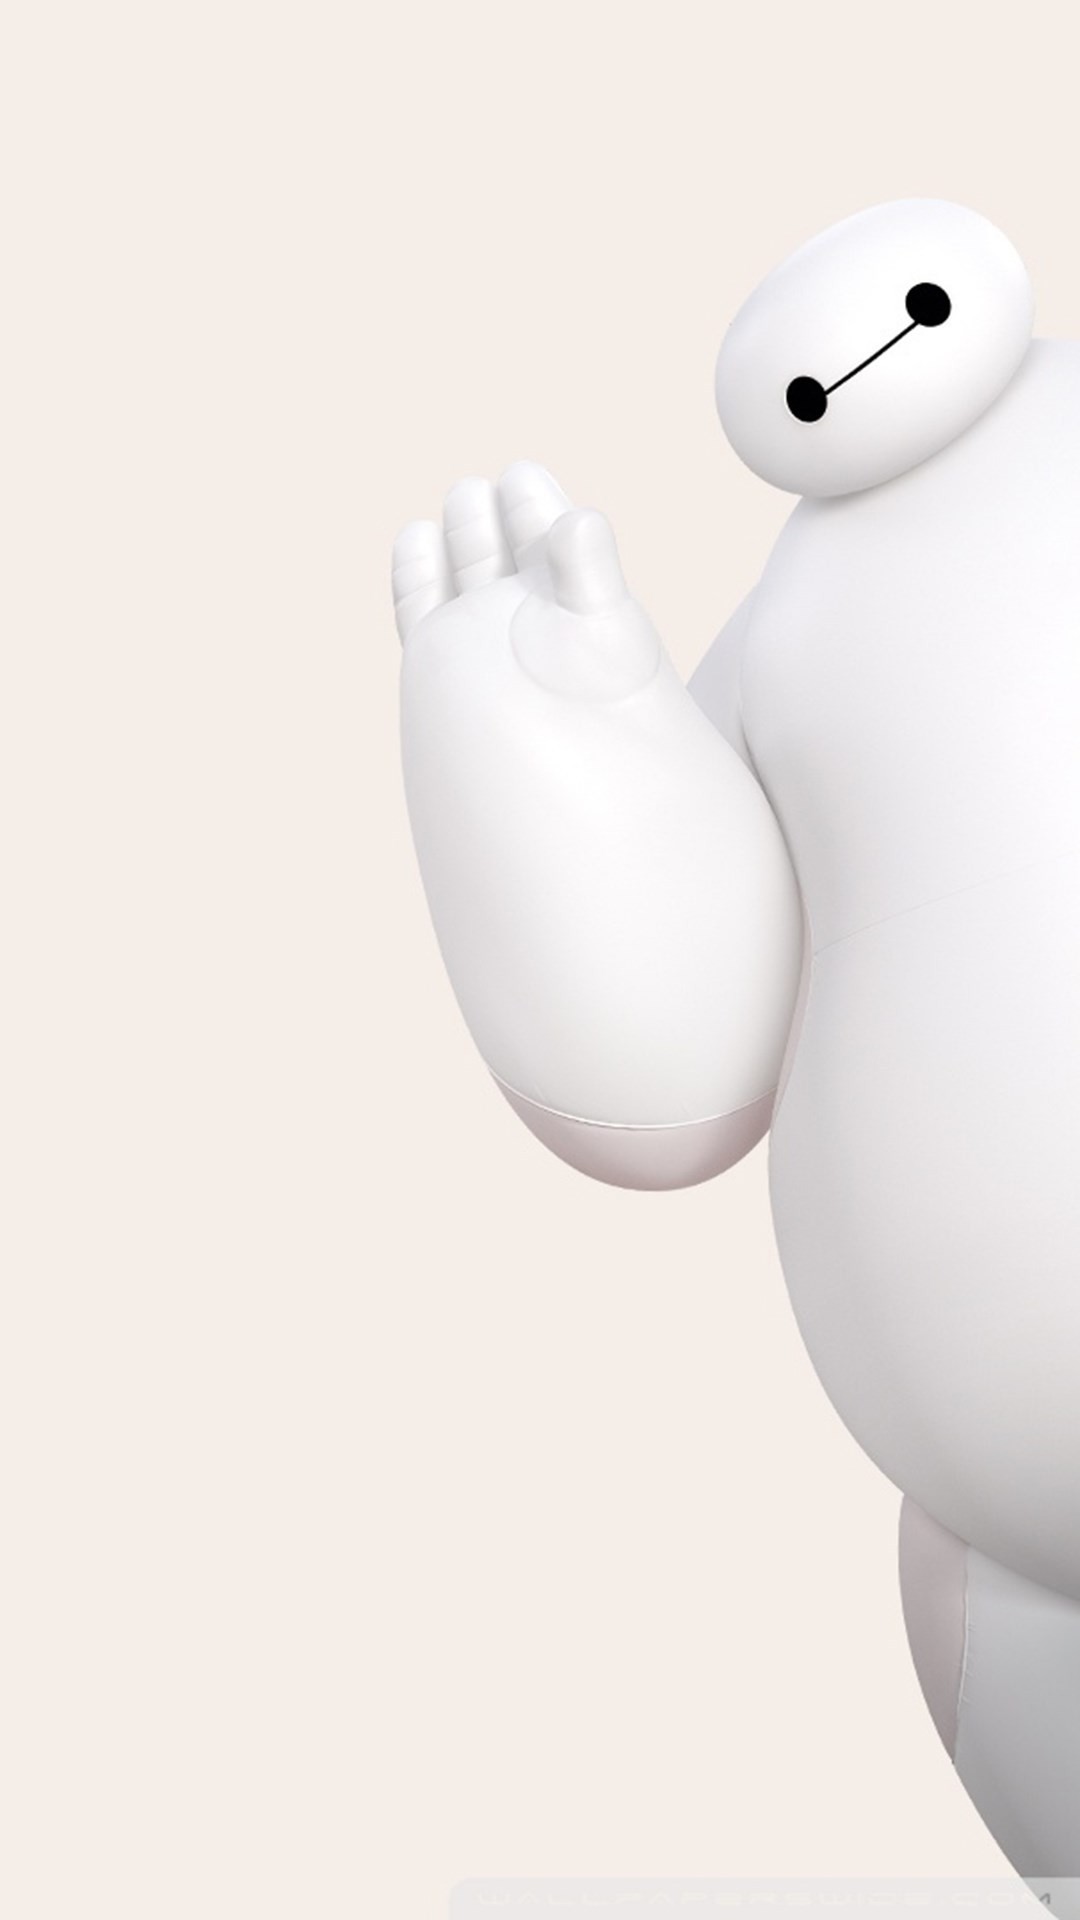 1080x1920  Search Results for “baymax wallpaper iphone – Adorable Wallpapers